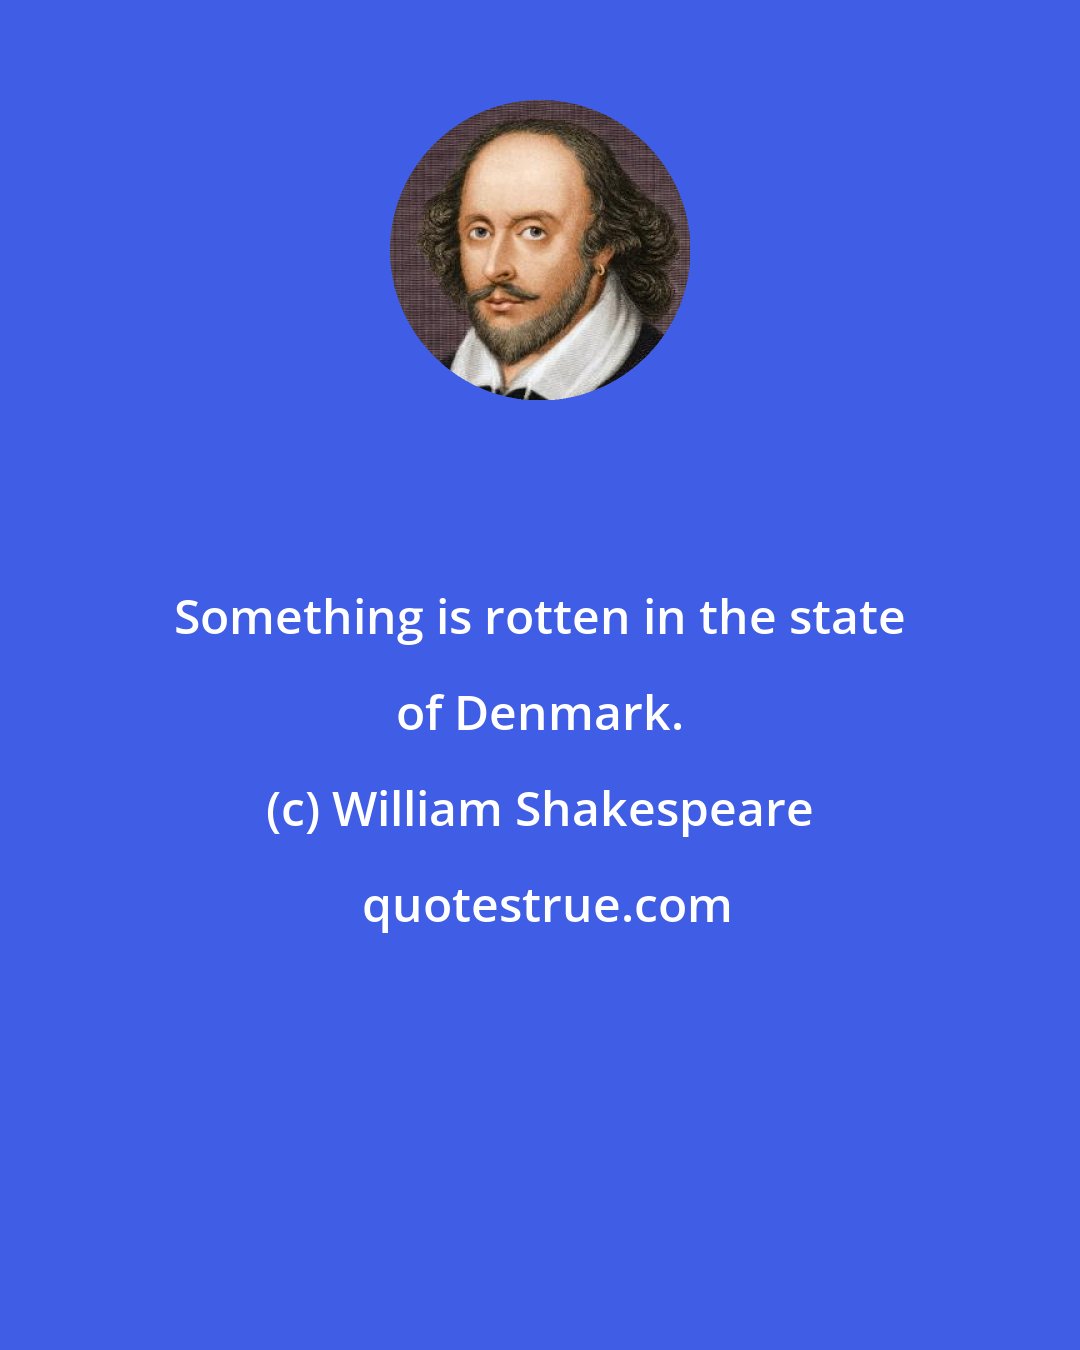 William Shakespeare: Something is rotten in the state of Denmark.